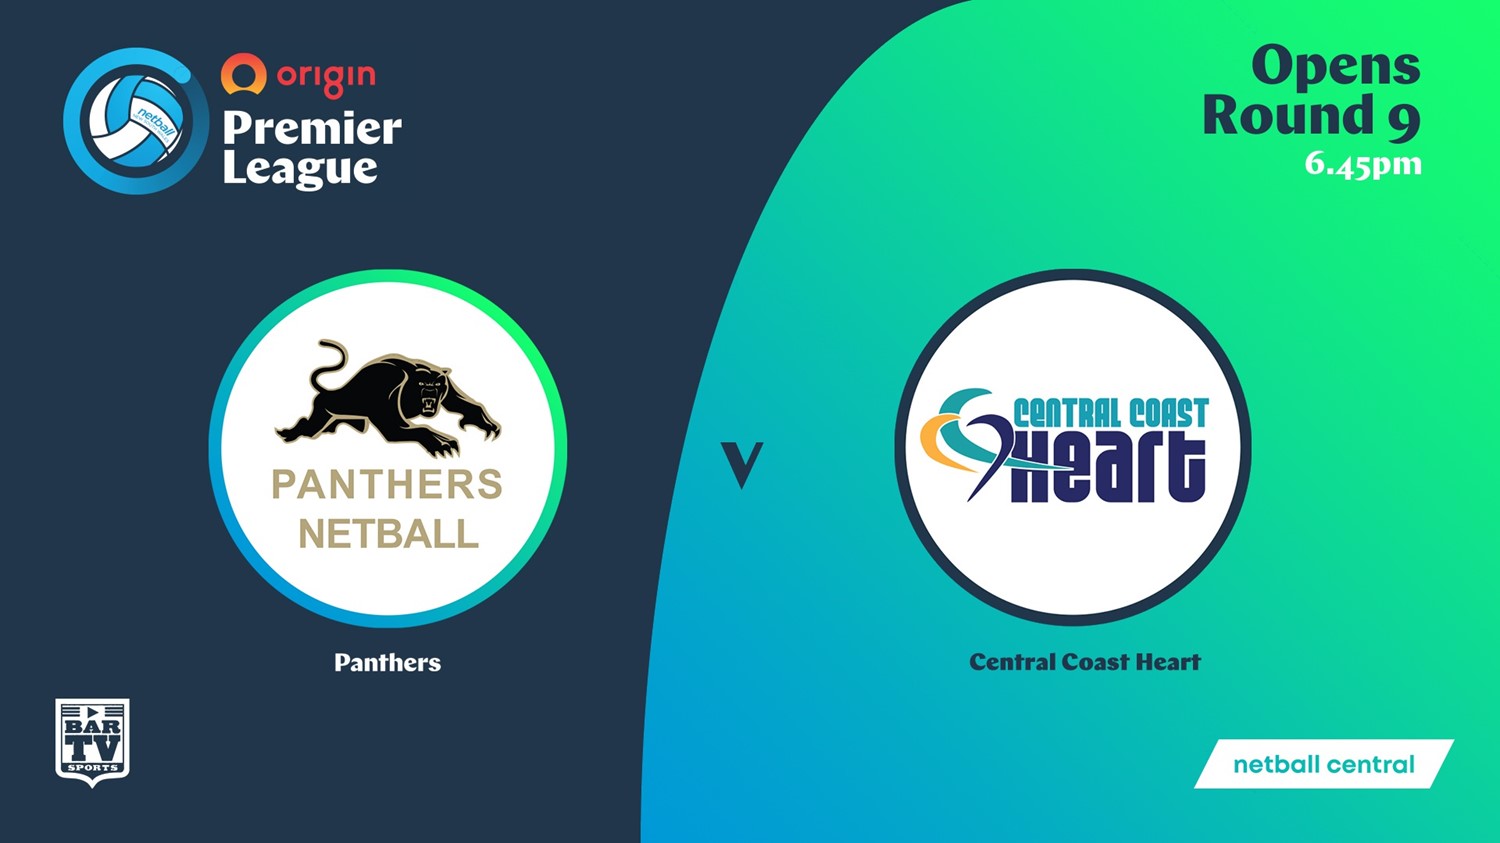 NSW Prem League Round 9 - Opens - Panthers v Central Coast Heart Minigame Slate Image